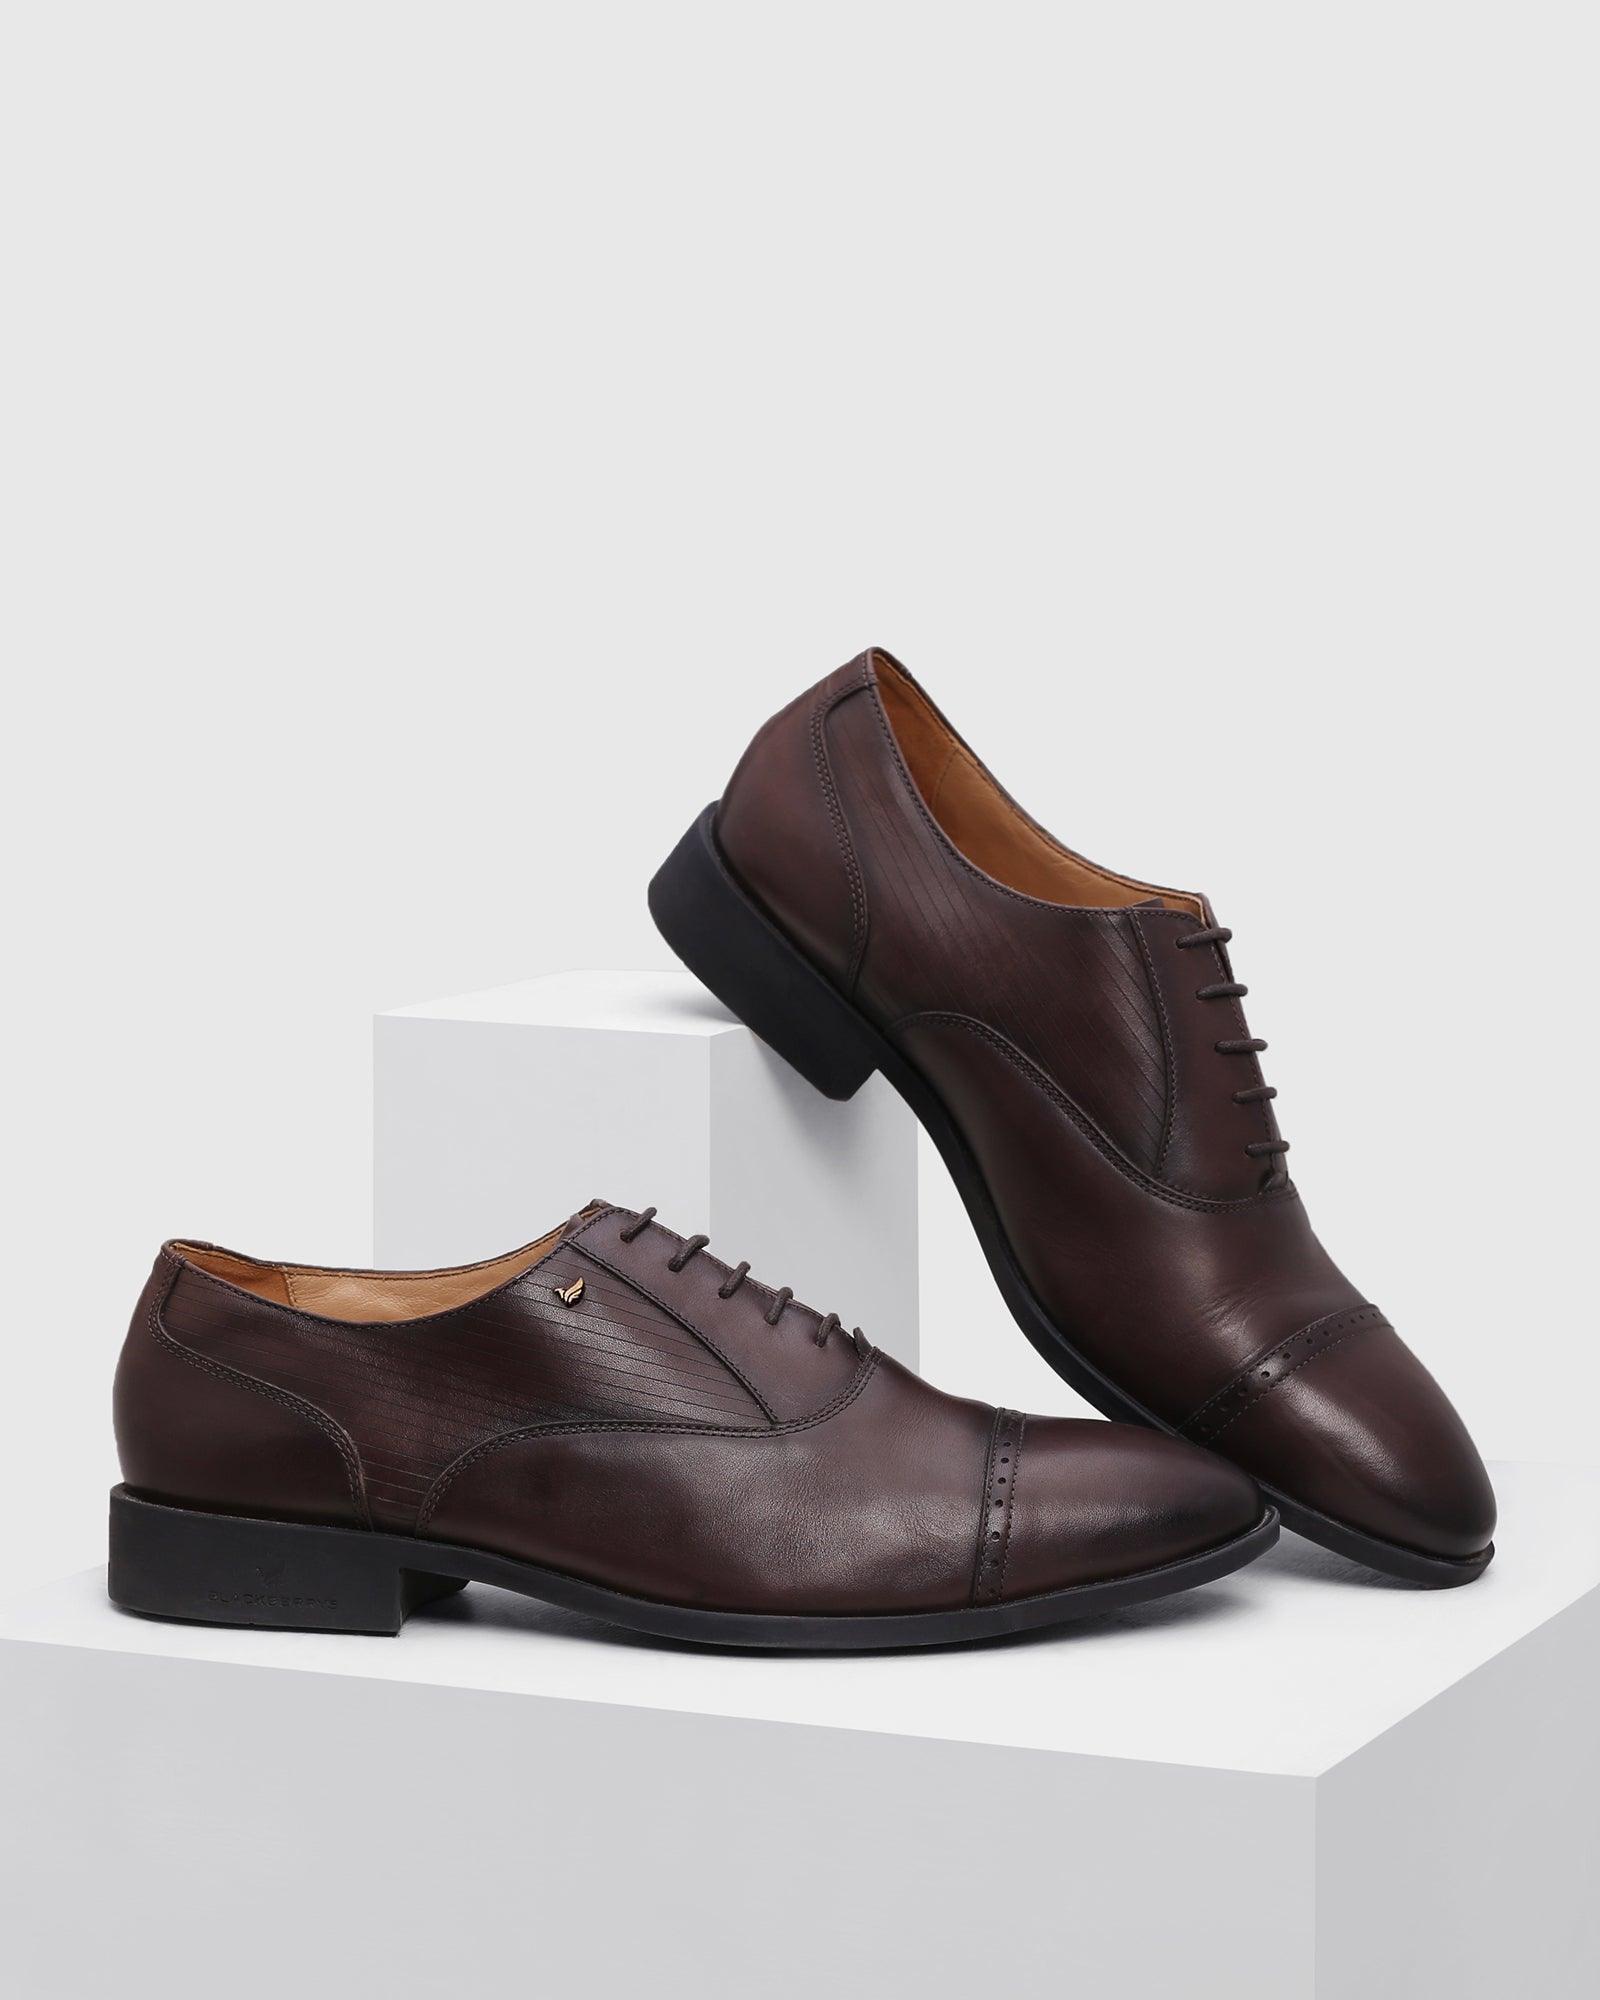 leather-formal-brown-solid-oxford-shoes---prebolt